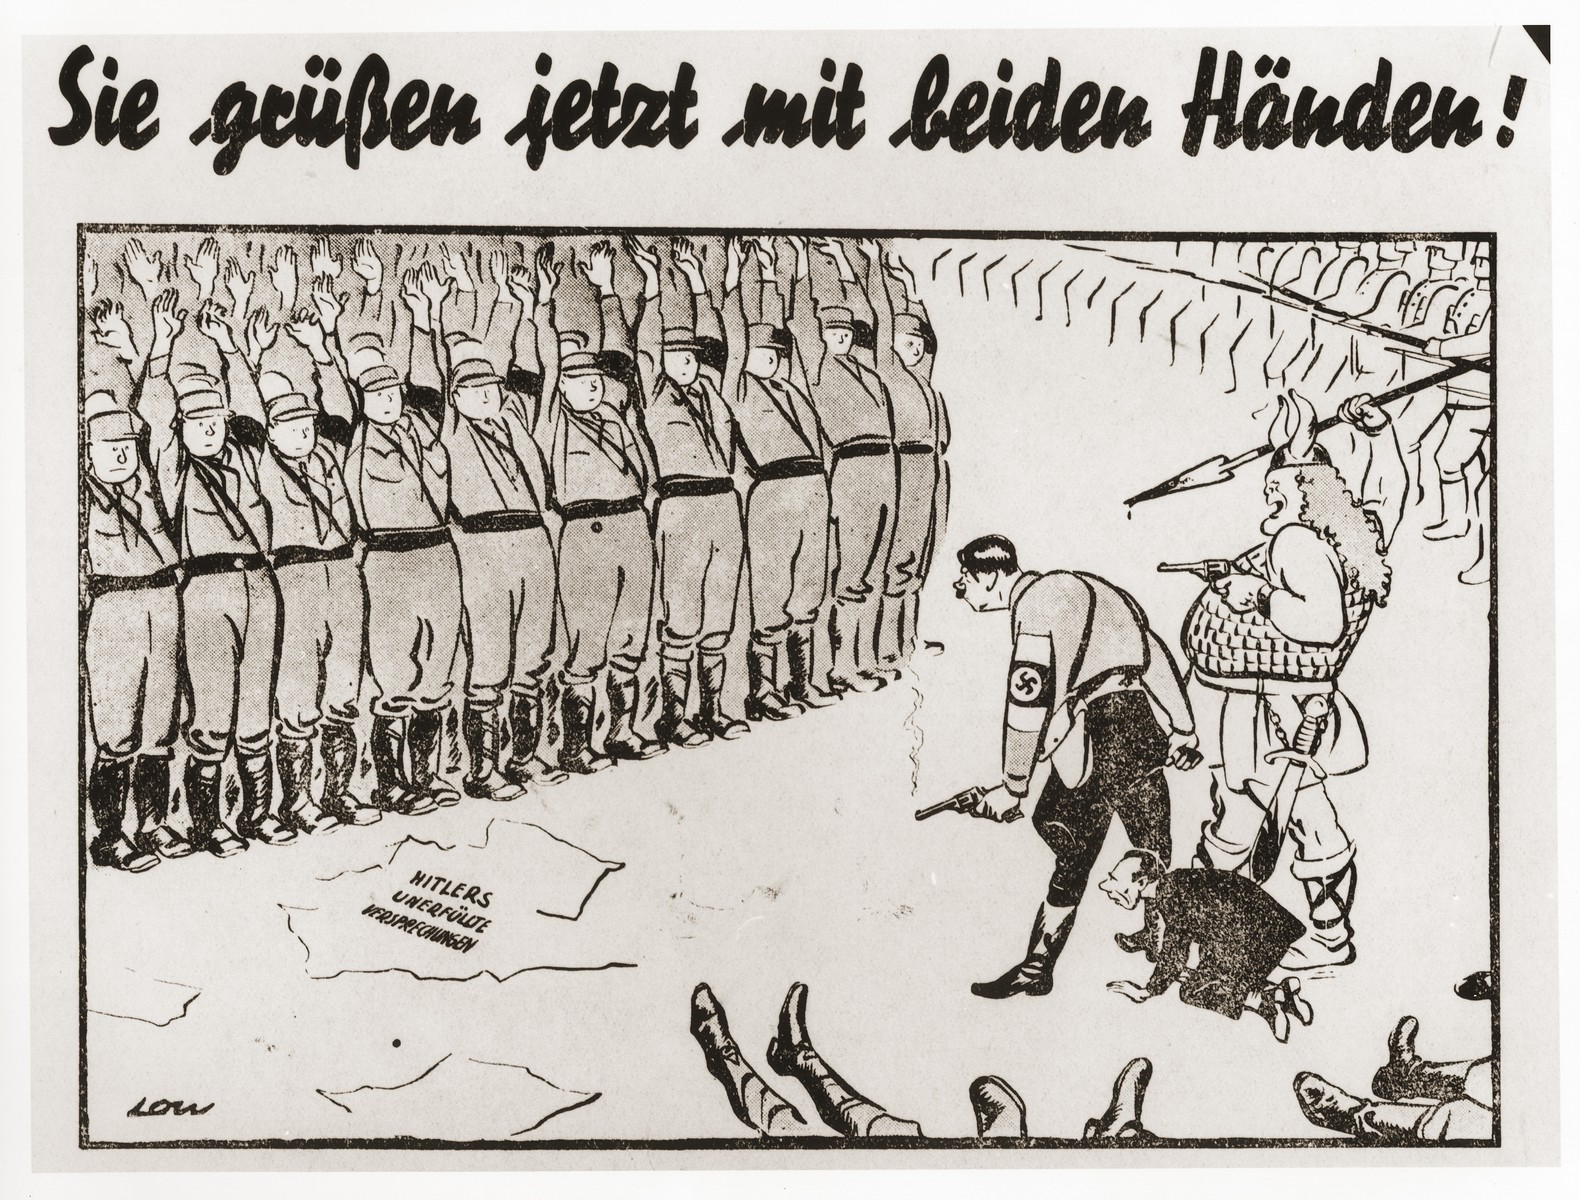 An anti-Nazi cartoon that criticizes opportunistic German supporters of  Adolf Hitler.  

Brownshirted men stand with their hands up before a menacing, gun-toting Hitler.  Next to him stands Hermann Goering depicted as an armed viking, while a cowering Joseph Goebbels peers out from between the legs of Hitler.  Helmeted soldiers march in from the right, and the booted feet of slain men lie in the foreground.  The German caption reads: "They greet now with both hands!"  At the feet of the frightened men lay scattered papers marked, "Hitler's overblown promises."  The cartoon is signed in the lower left-hand corner by "Low.".